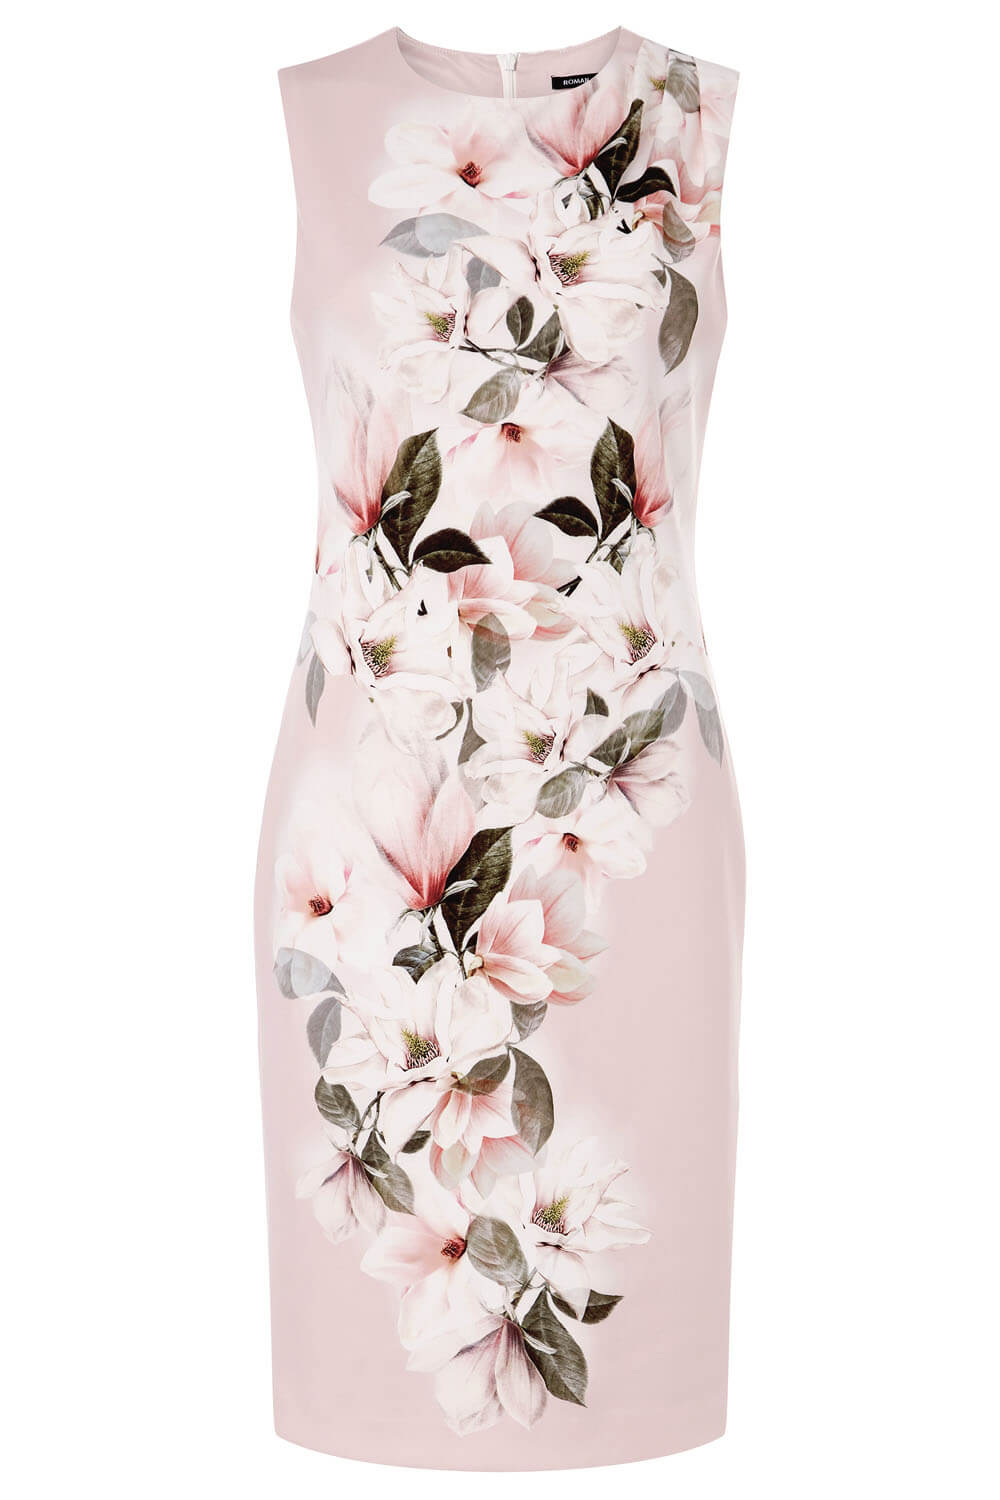 Light-Pink Fitted Floral Print Luxe Stretch Dress, Image 5 of 5